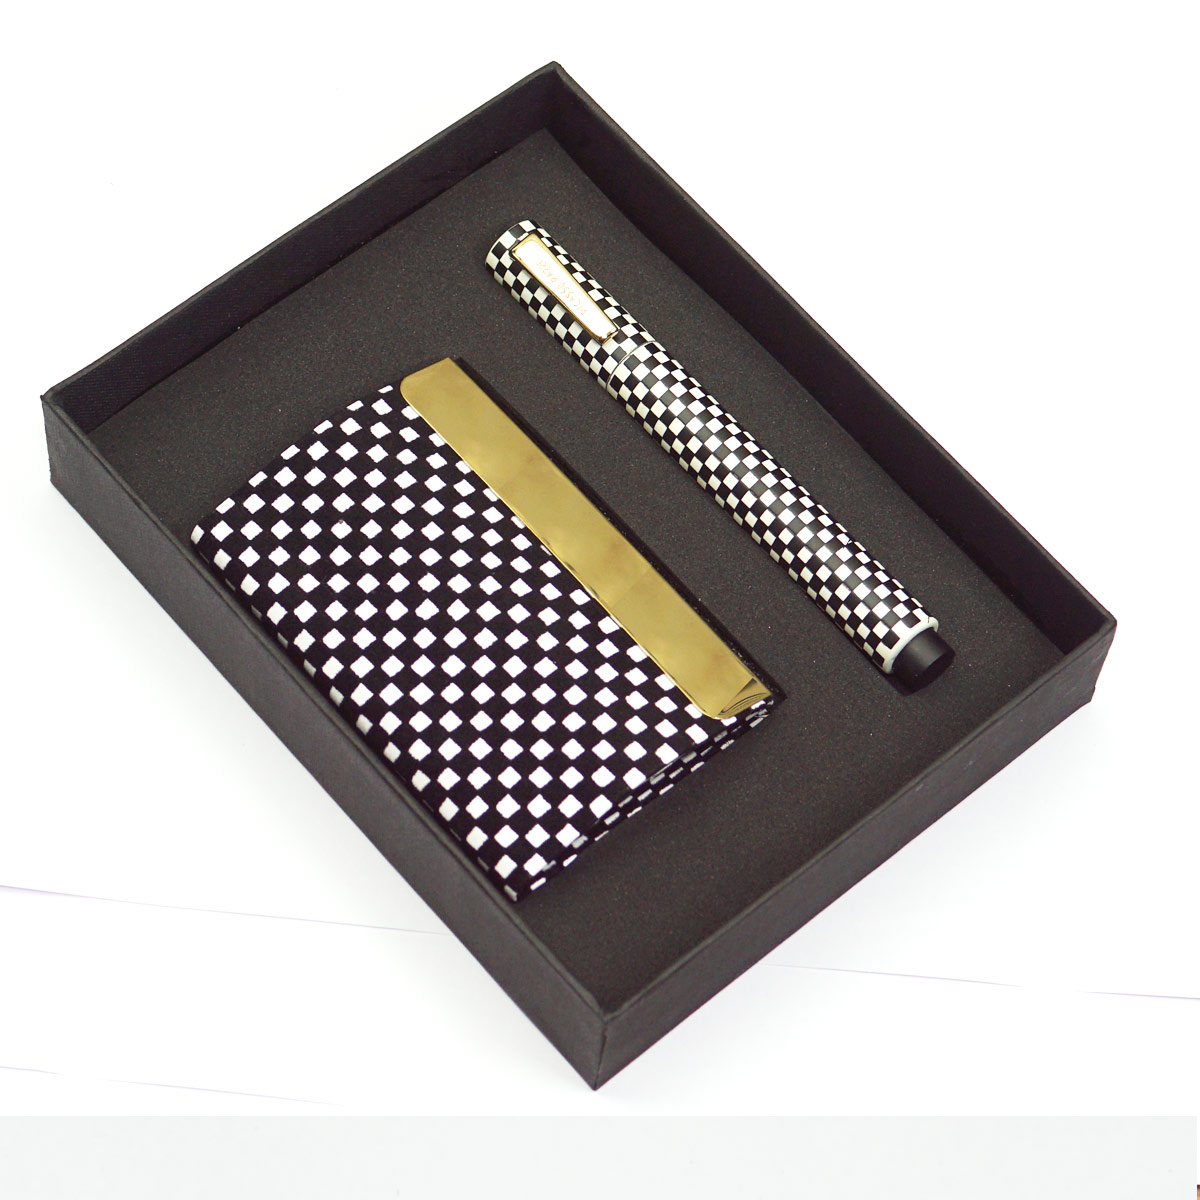 Picasso Parri Wazir 2 in 1 Chess Design Body  With Fine Tip And Same Designed Card Hold Cap Type Ball Pen Set SKU 23172